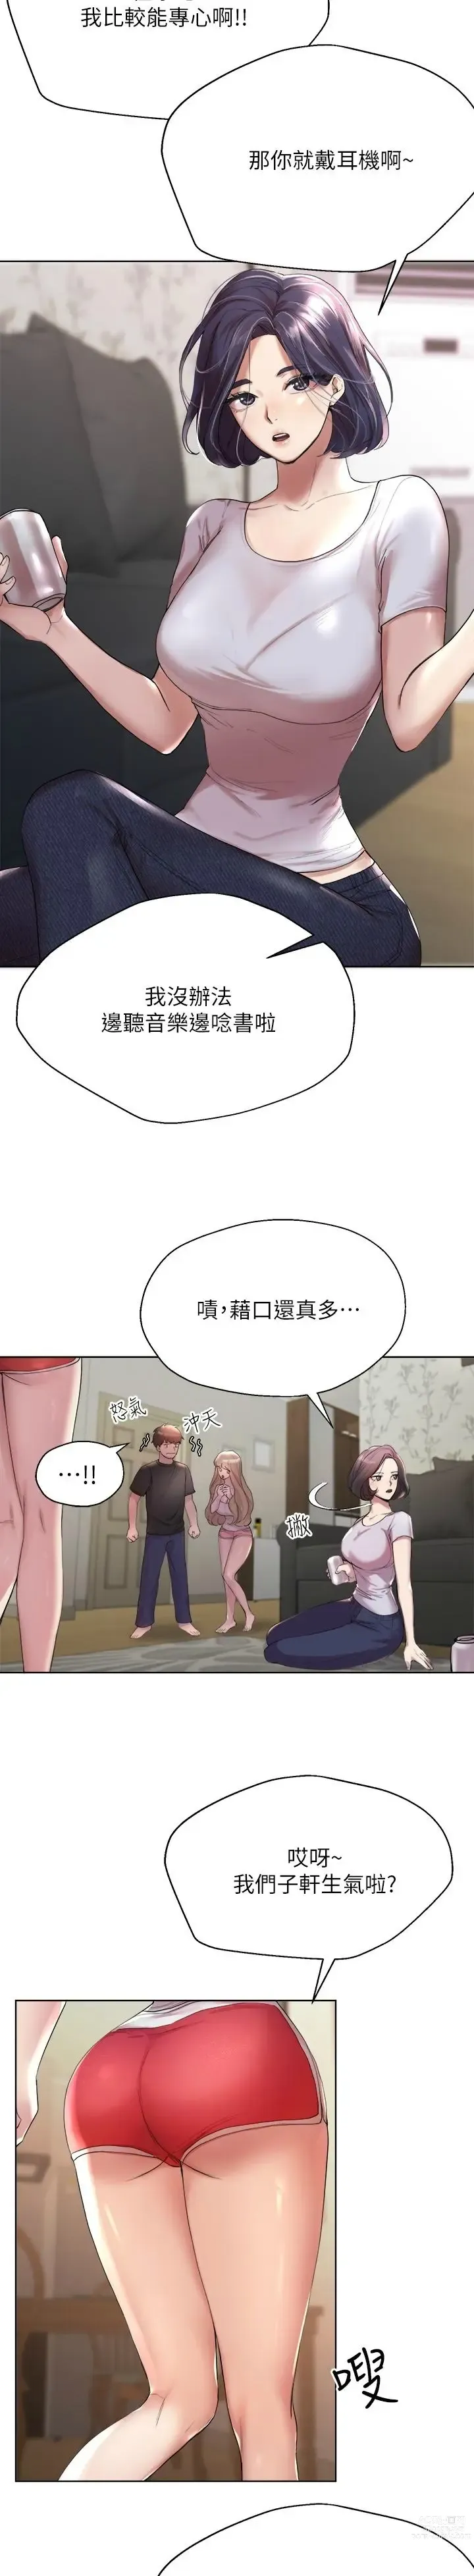 Page 10 of manga 姐姐们的调教／My Sister’s Friends